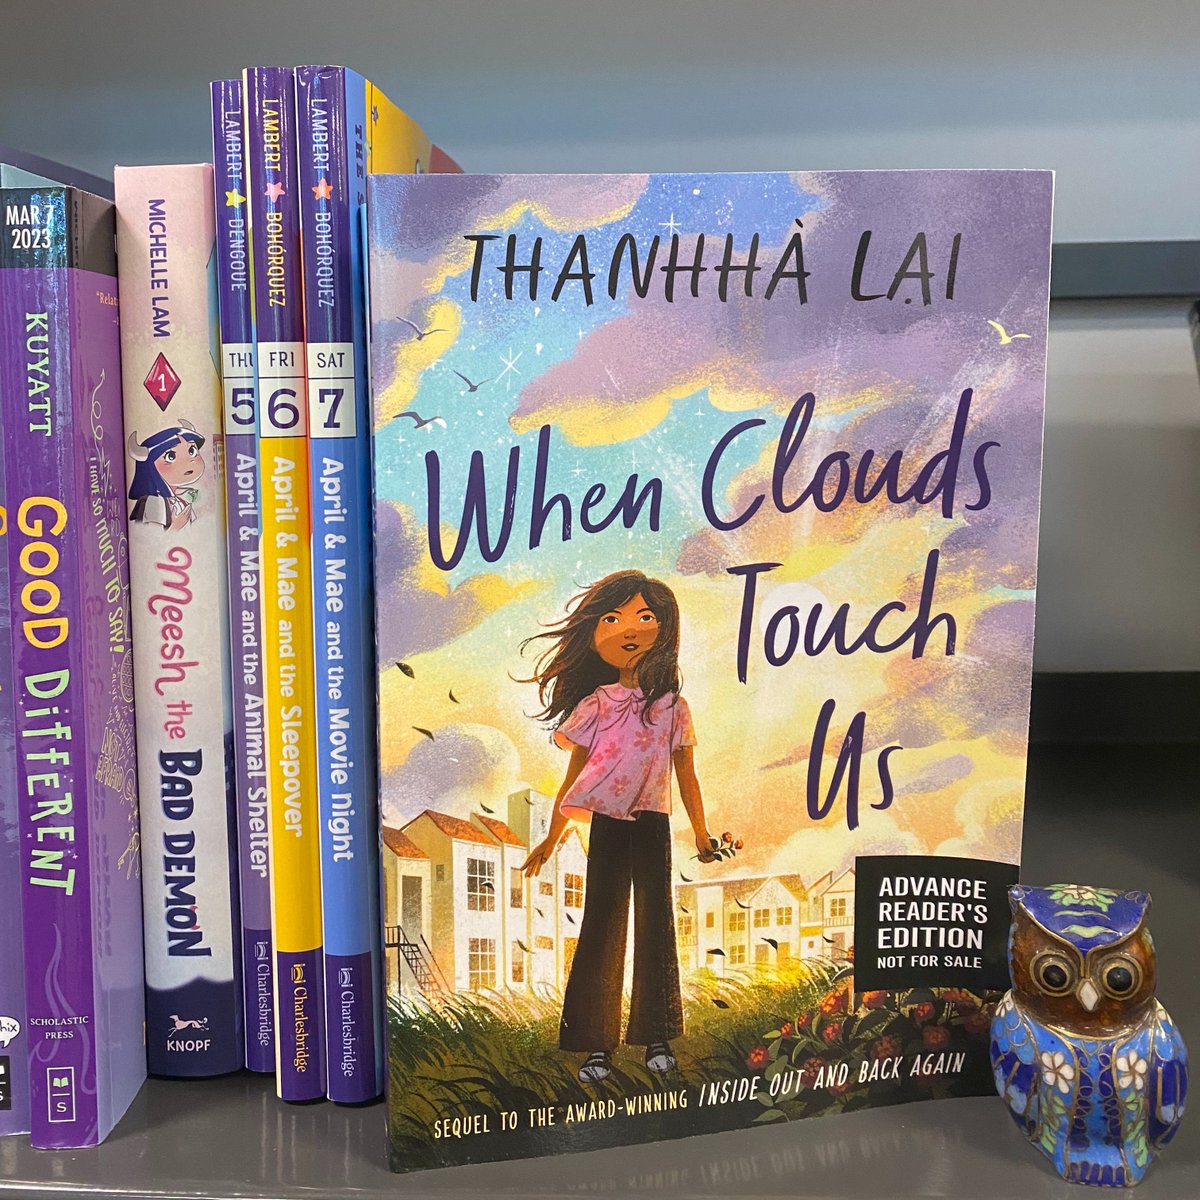 📚☁ When Clouds Touch Us by Thanhhà Lai. #dailybutlershelfie #WhenCloudsTouchUs @ThanhhaLai @HarperCollins